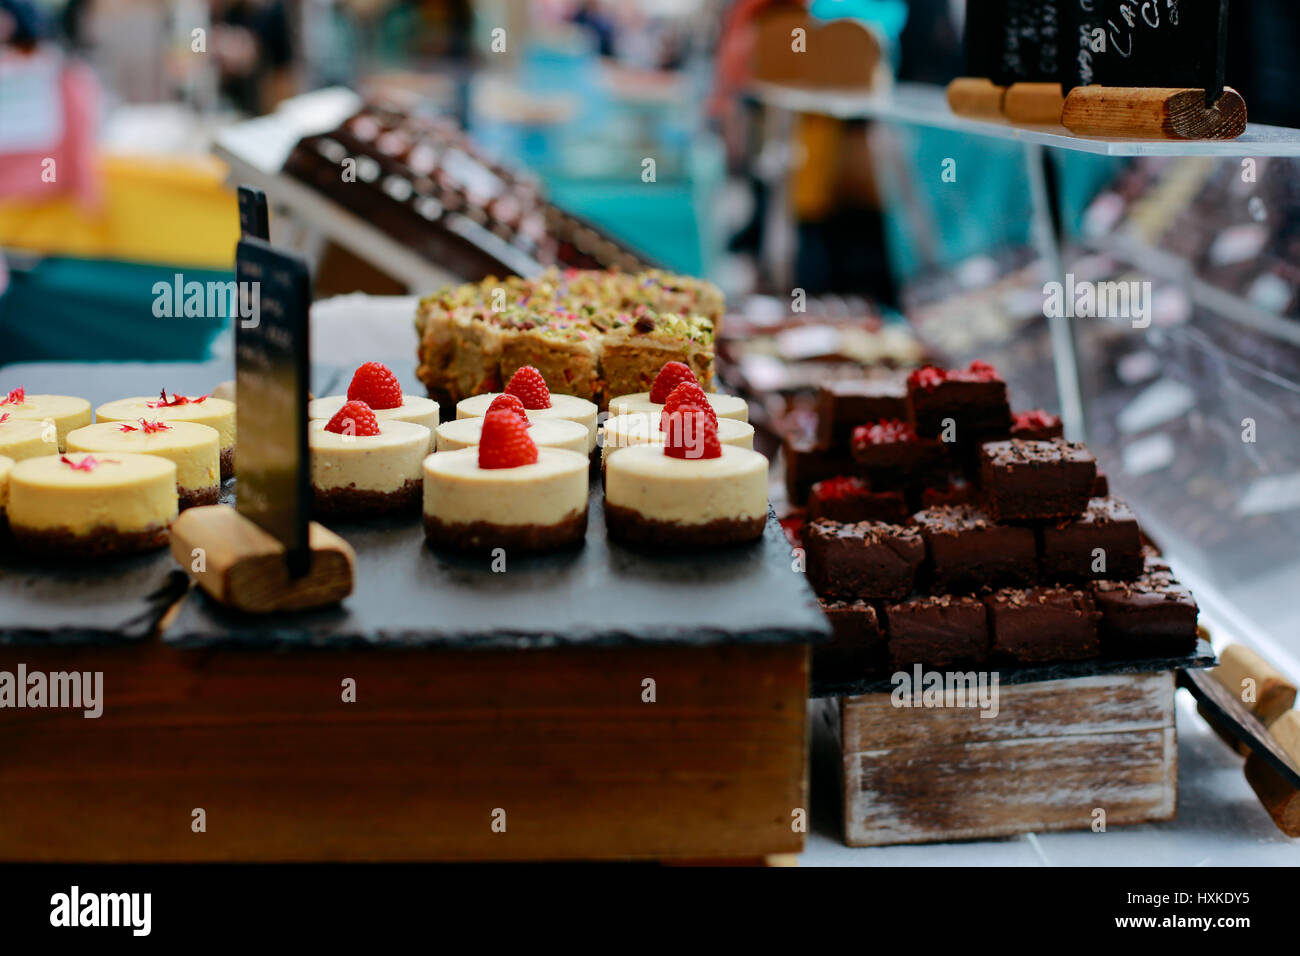 Homemade desserts on sale in Greenwich Market, London's only market set within a World Heritage Site. Stock Photo